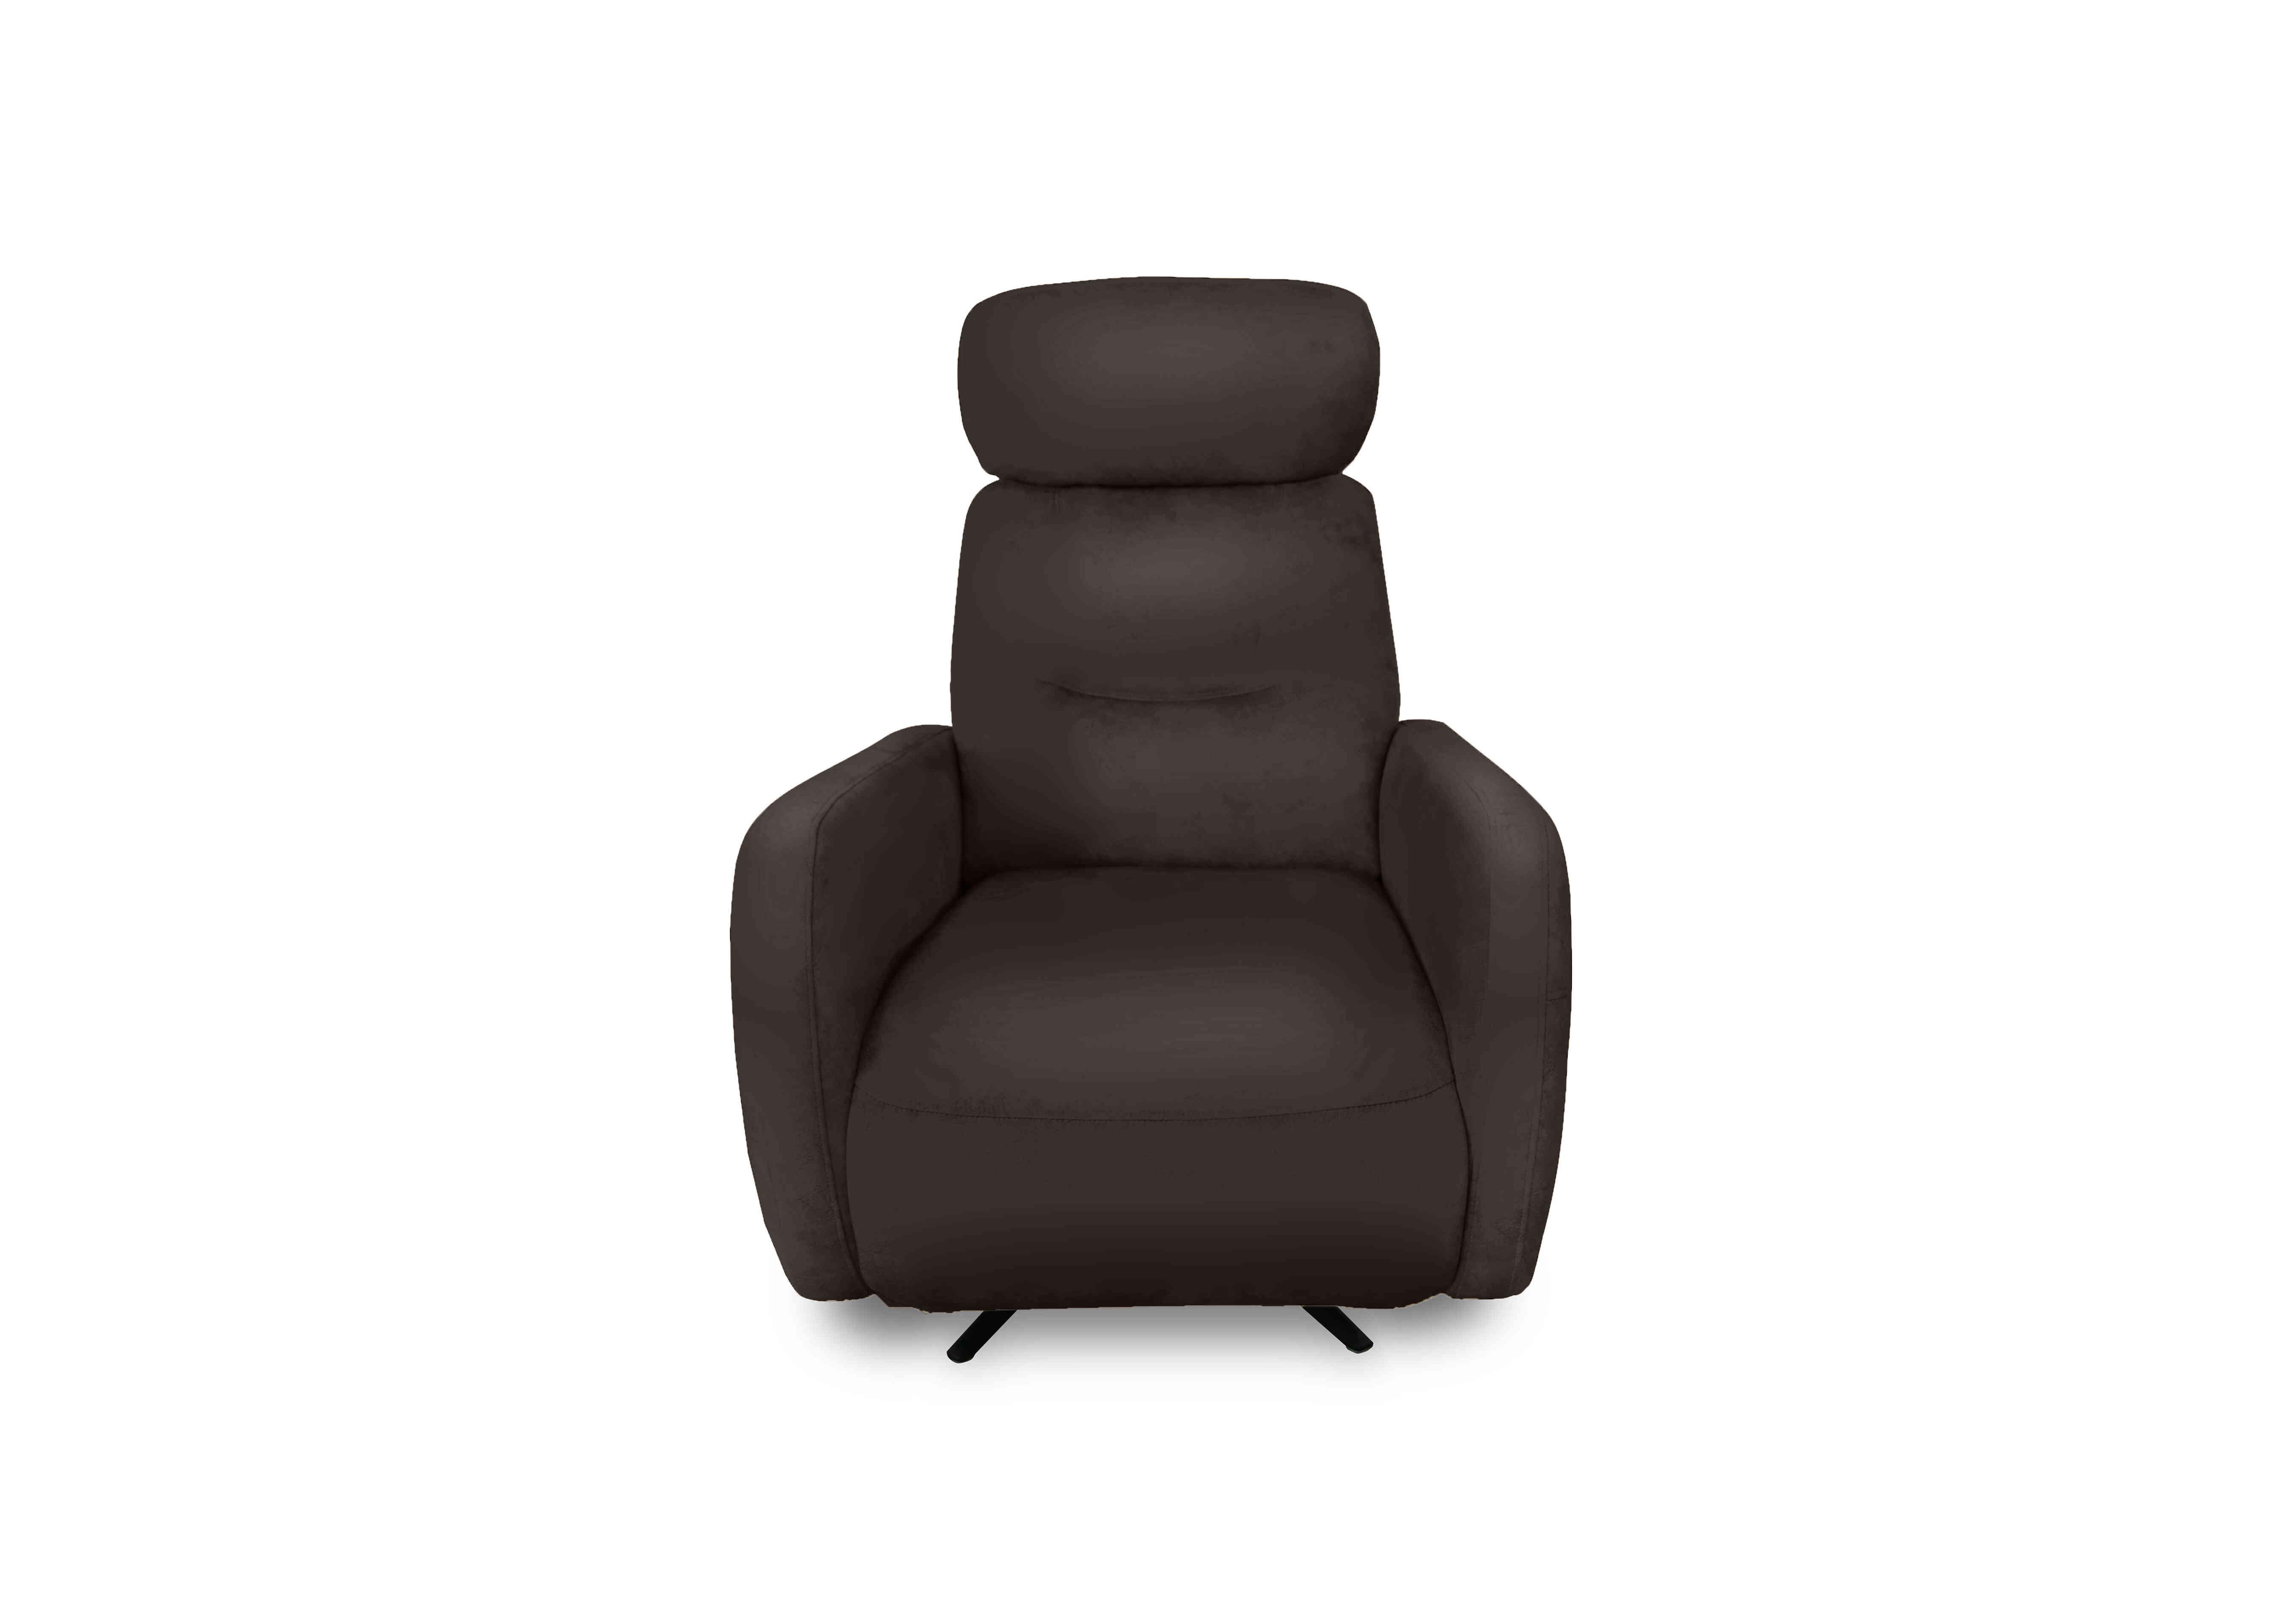 Designer Chair Collection Tokyo Leather Manual Recliner Swivel Chair in Bv-1748 Dark Chocolate on Furniture Village